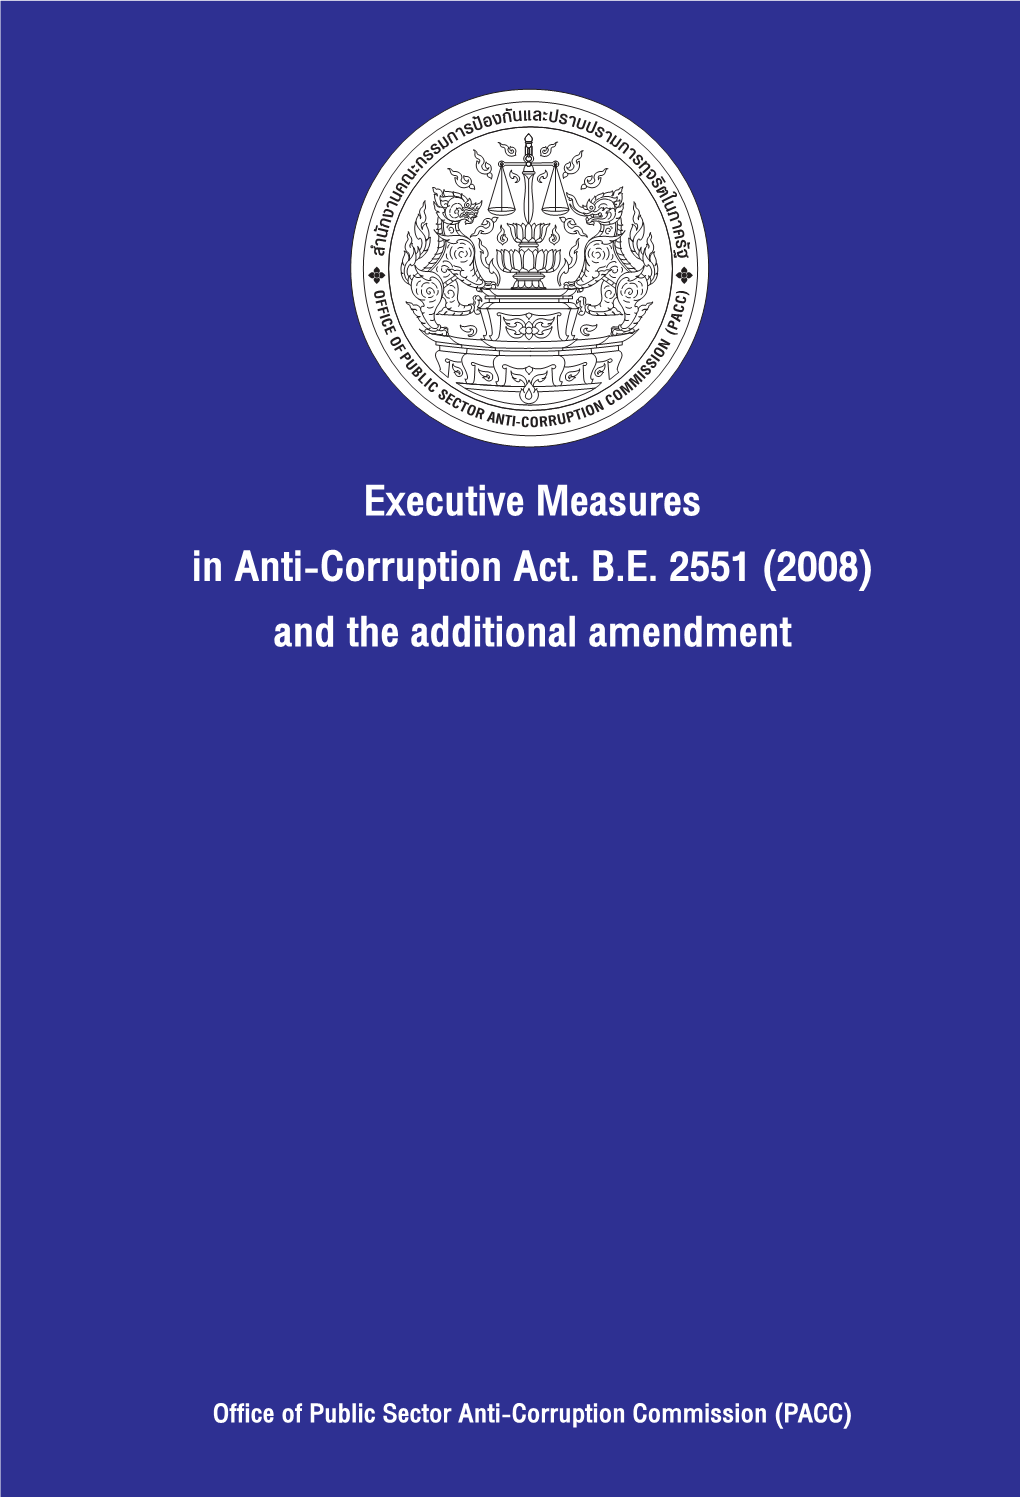 Executive Measures in Anti-Corruption Act. B.E. 2551 (2008) and the Additional Amendment